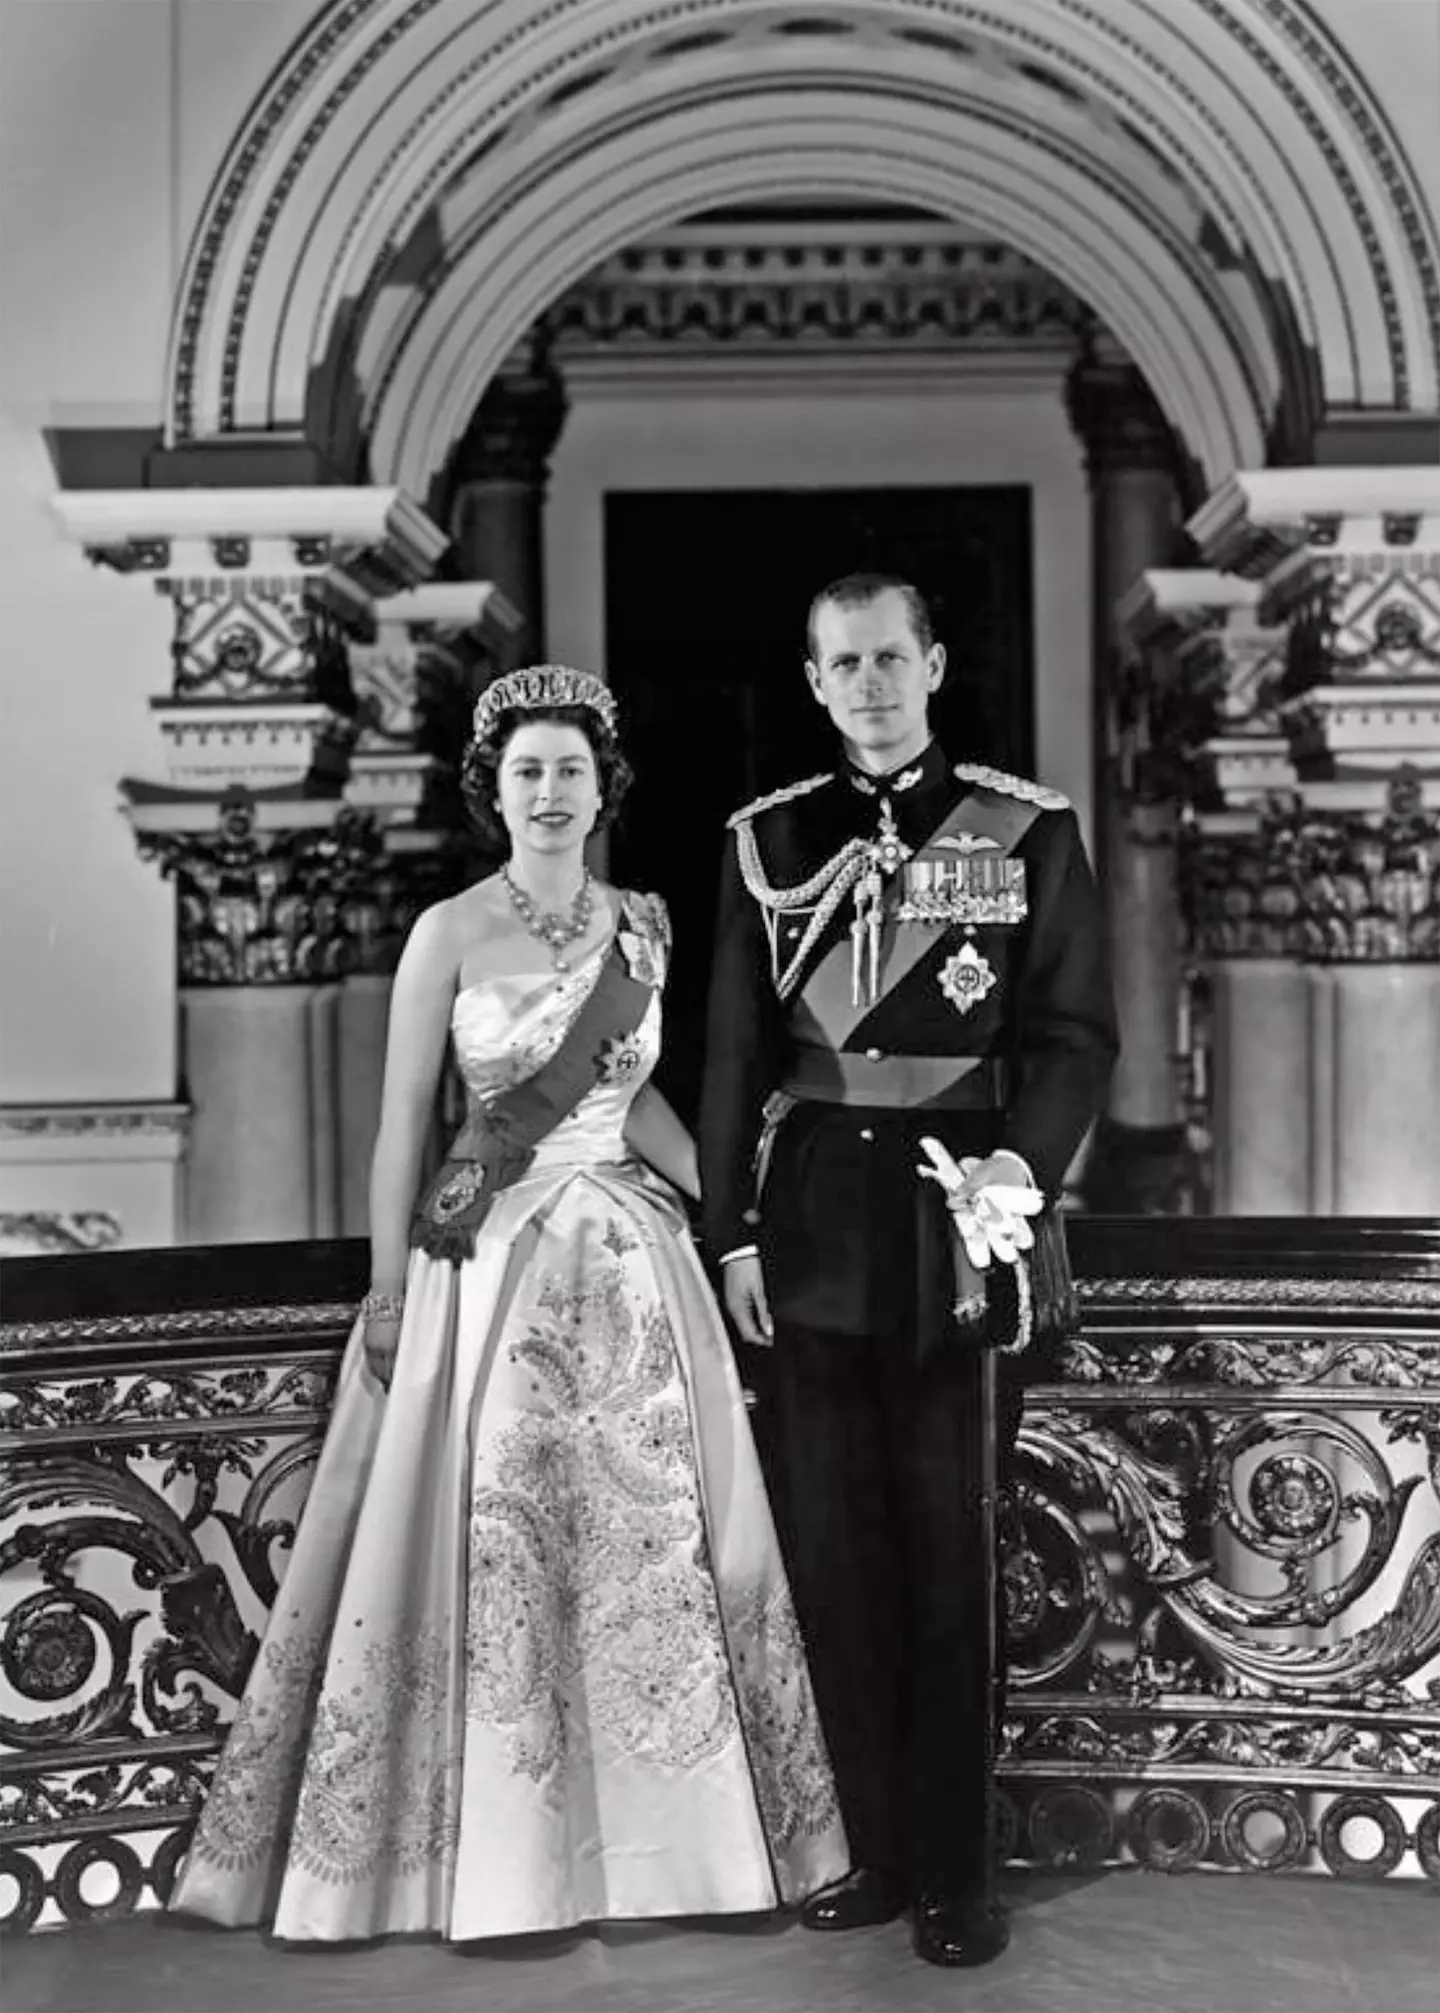 The Queen and Prince Philip in 1958.